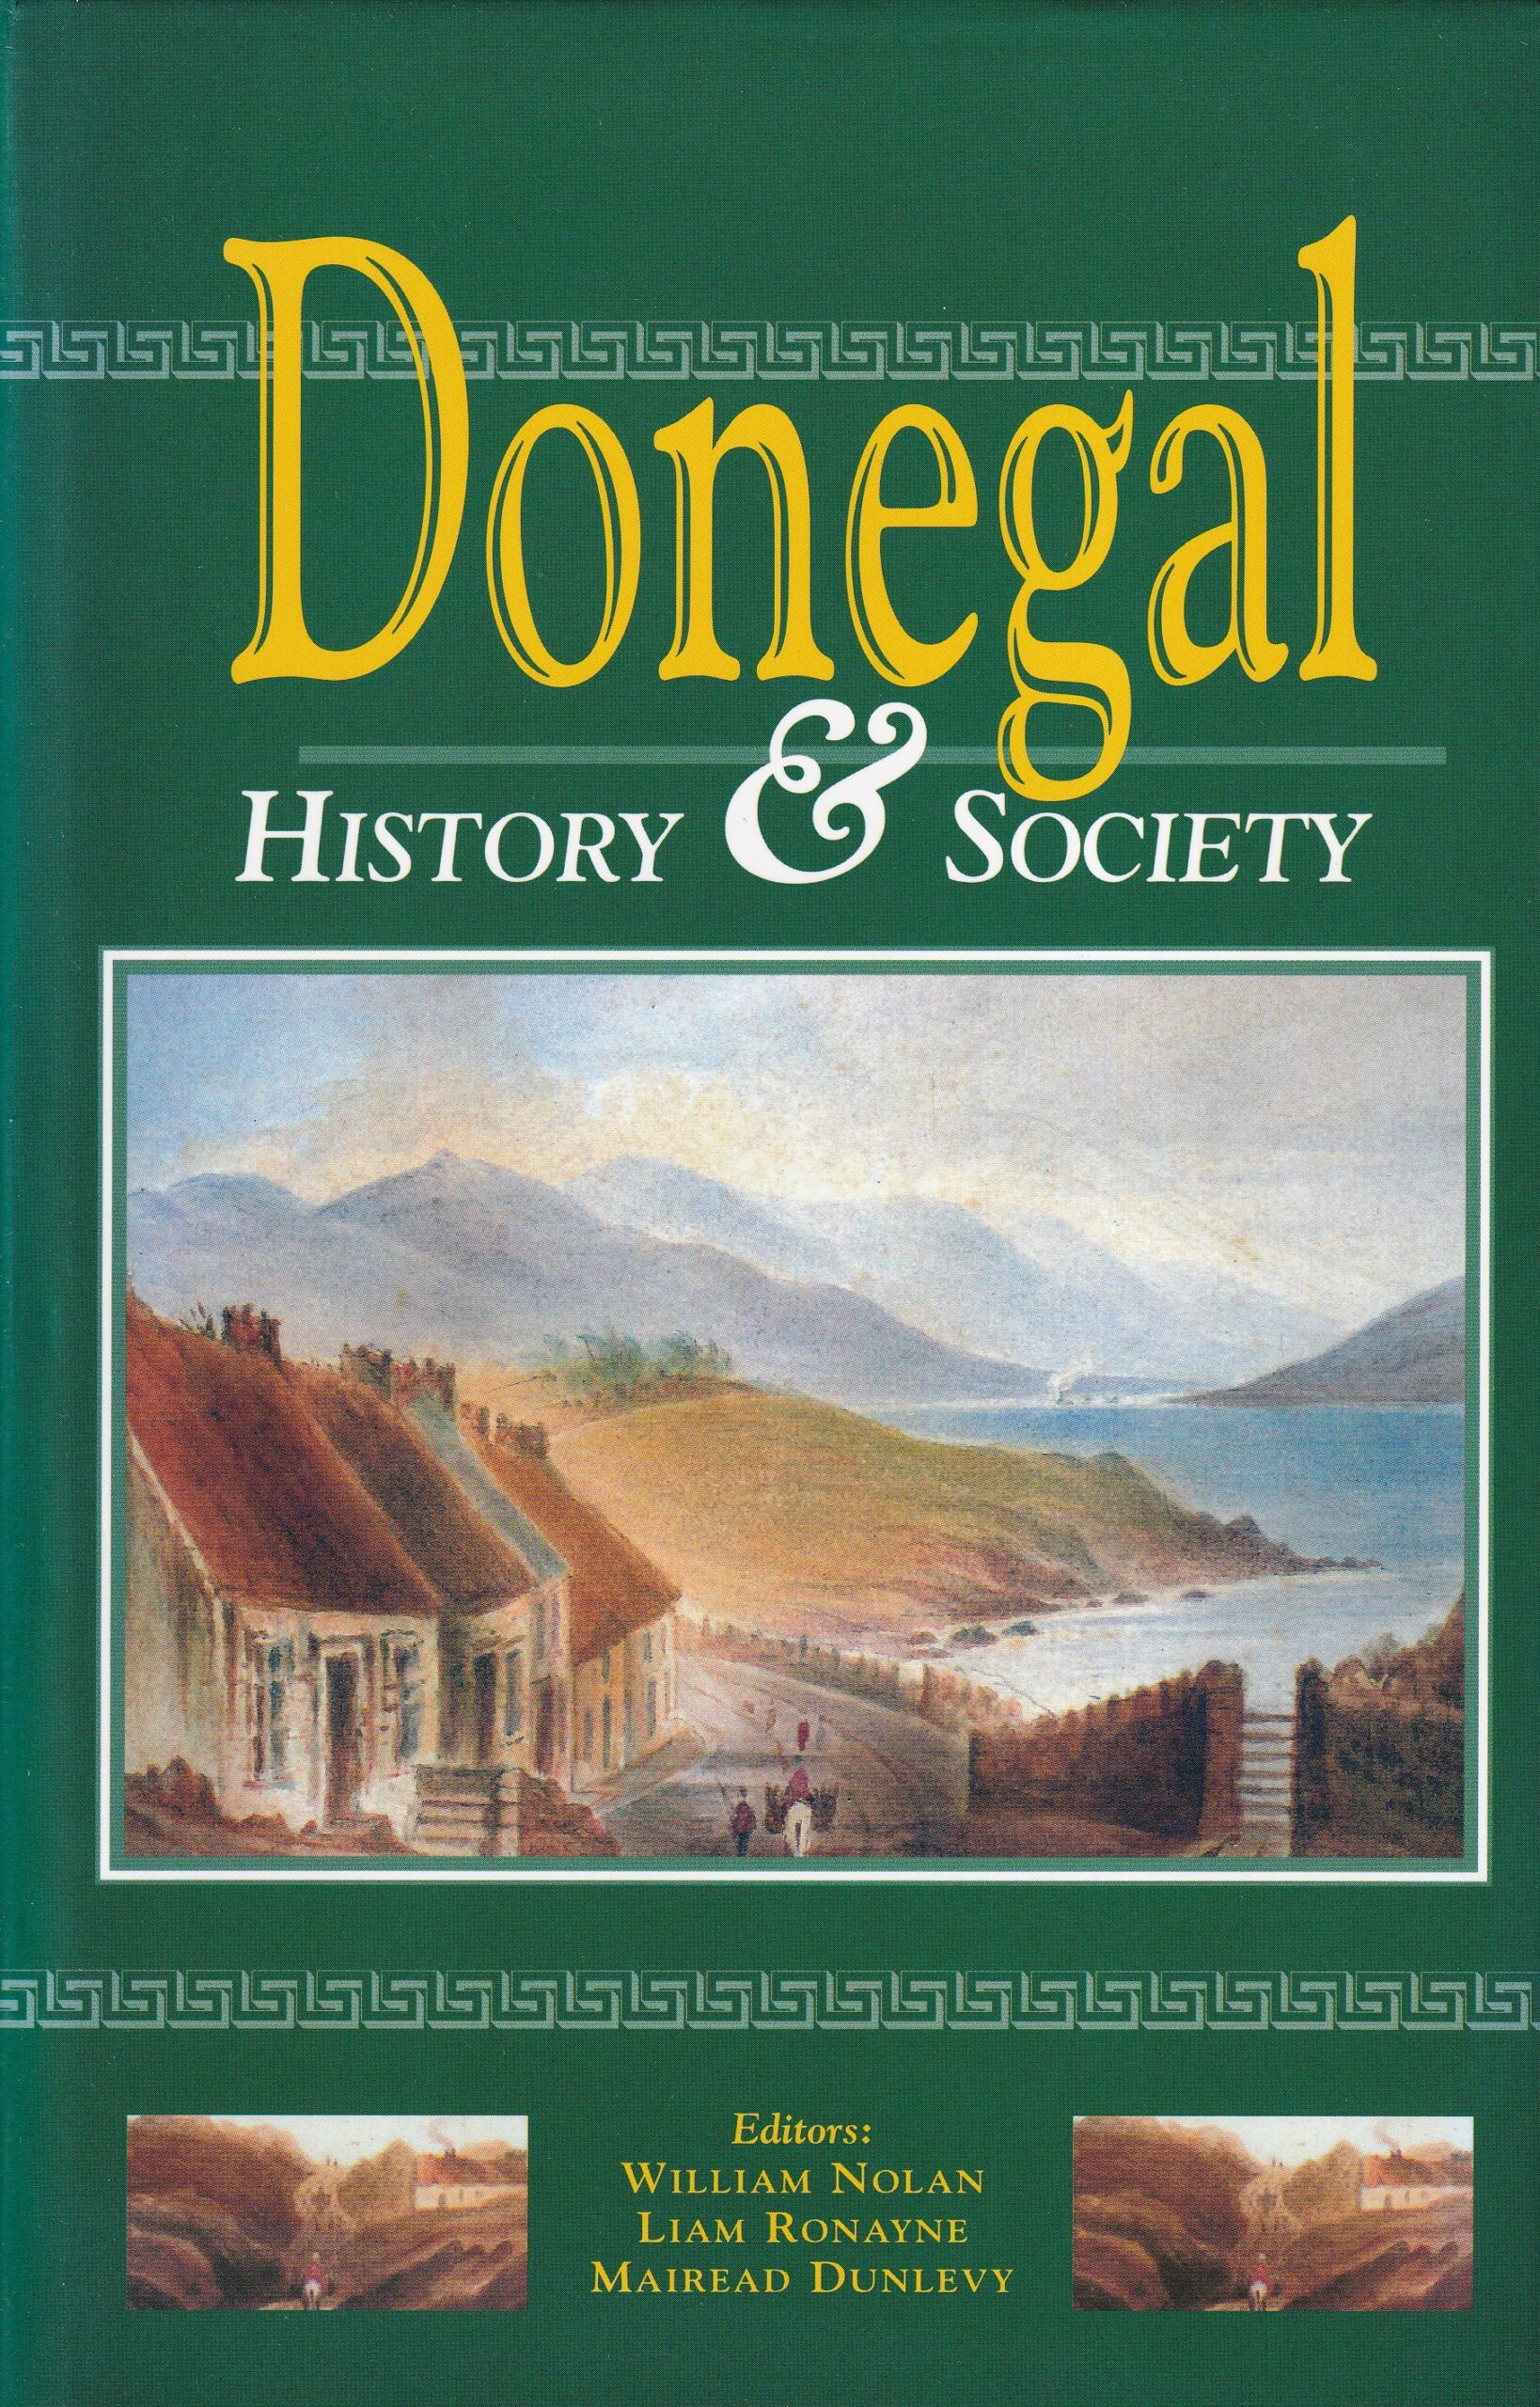 Donegal: History and Society by William Nolan, Liam Ronayne and Mairead Dunleavy (eds.)